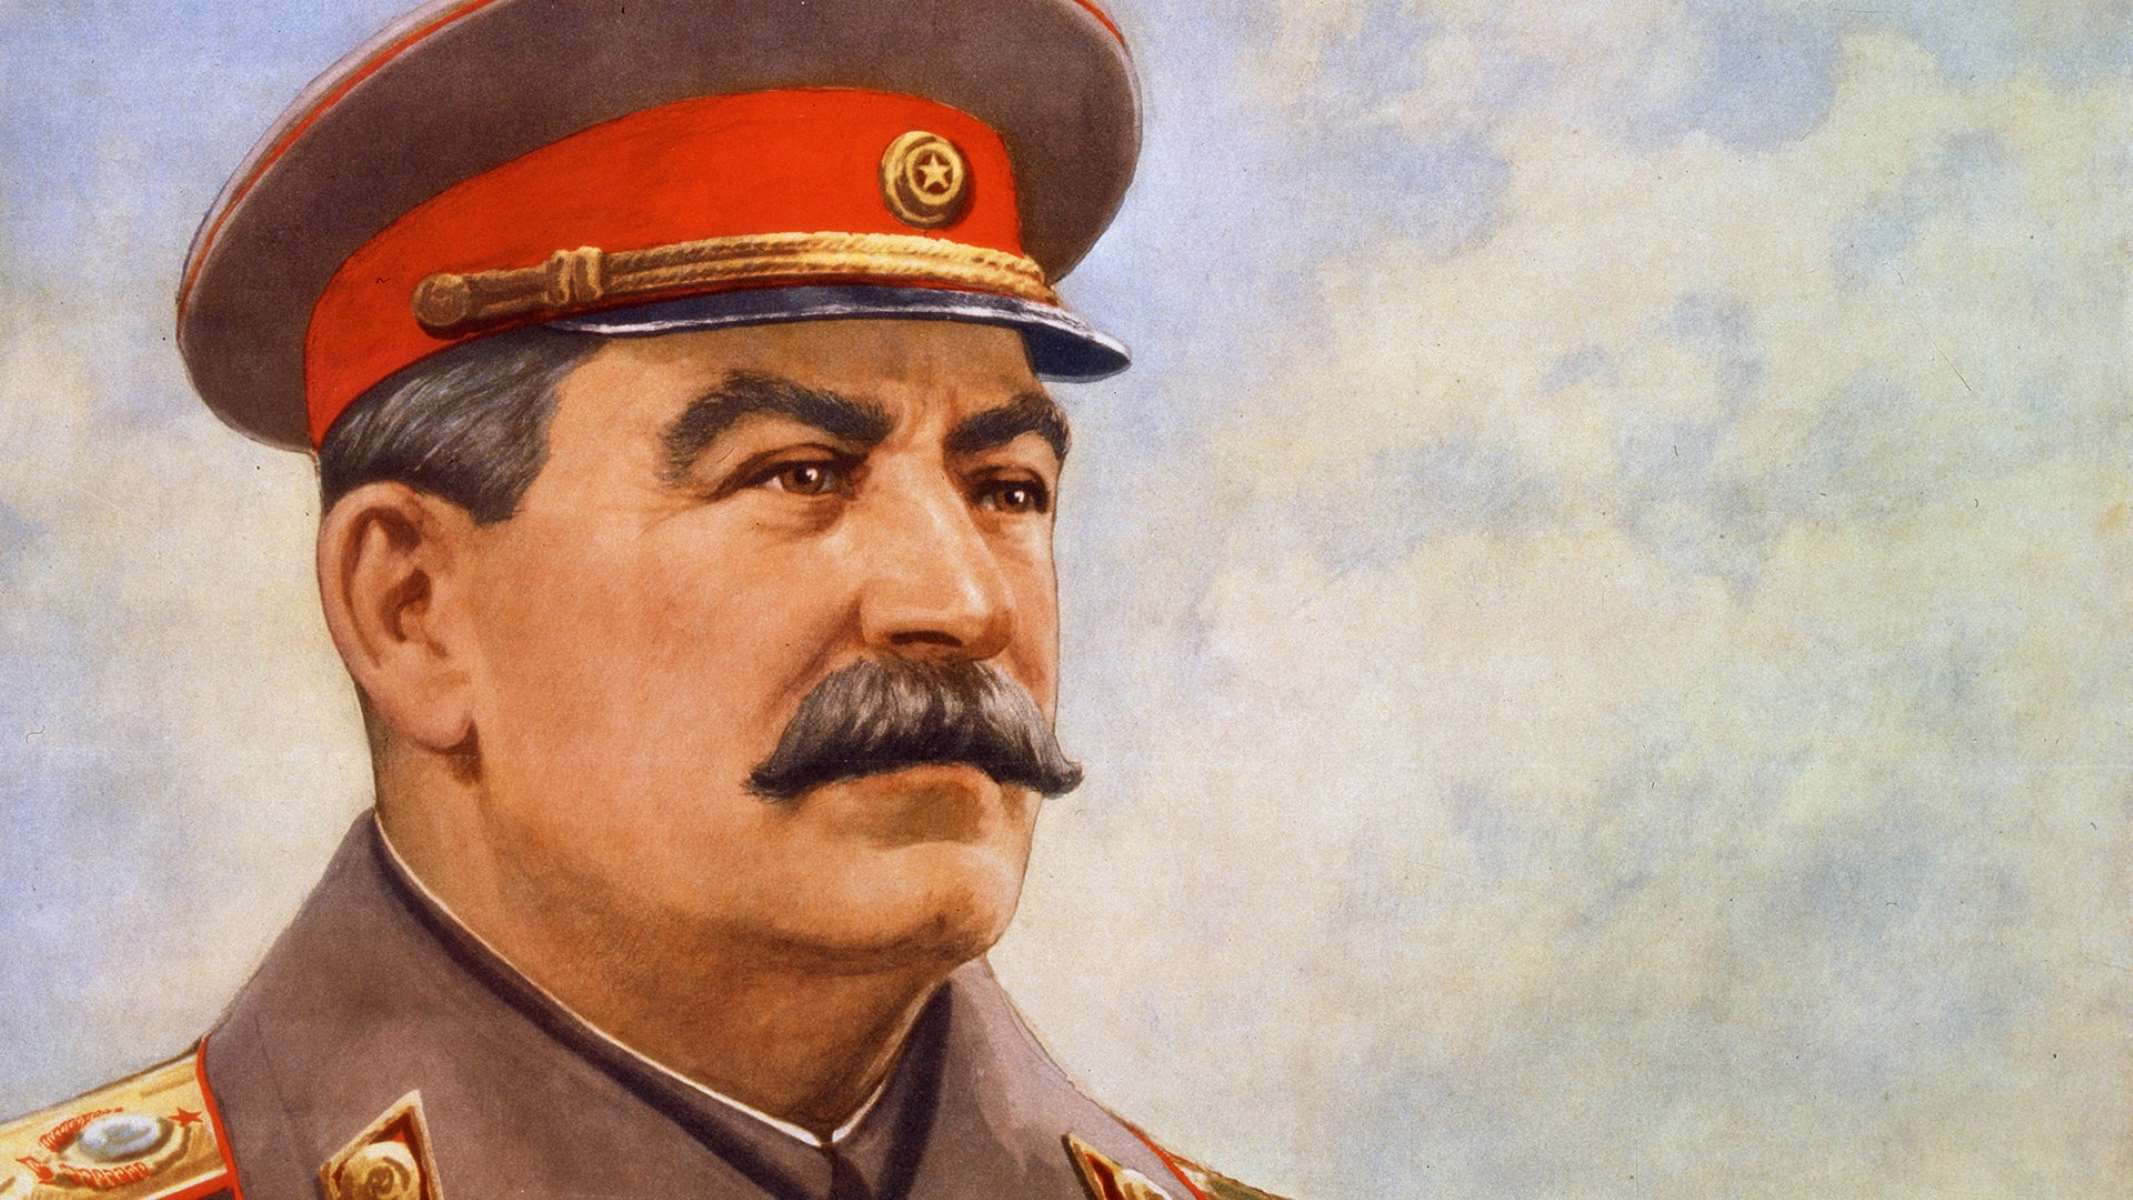 8 Mind-blowing Facts About Joseph Stalin - Facts.net